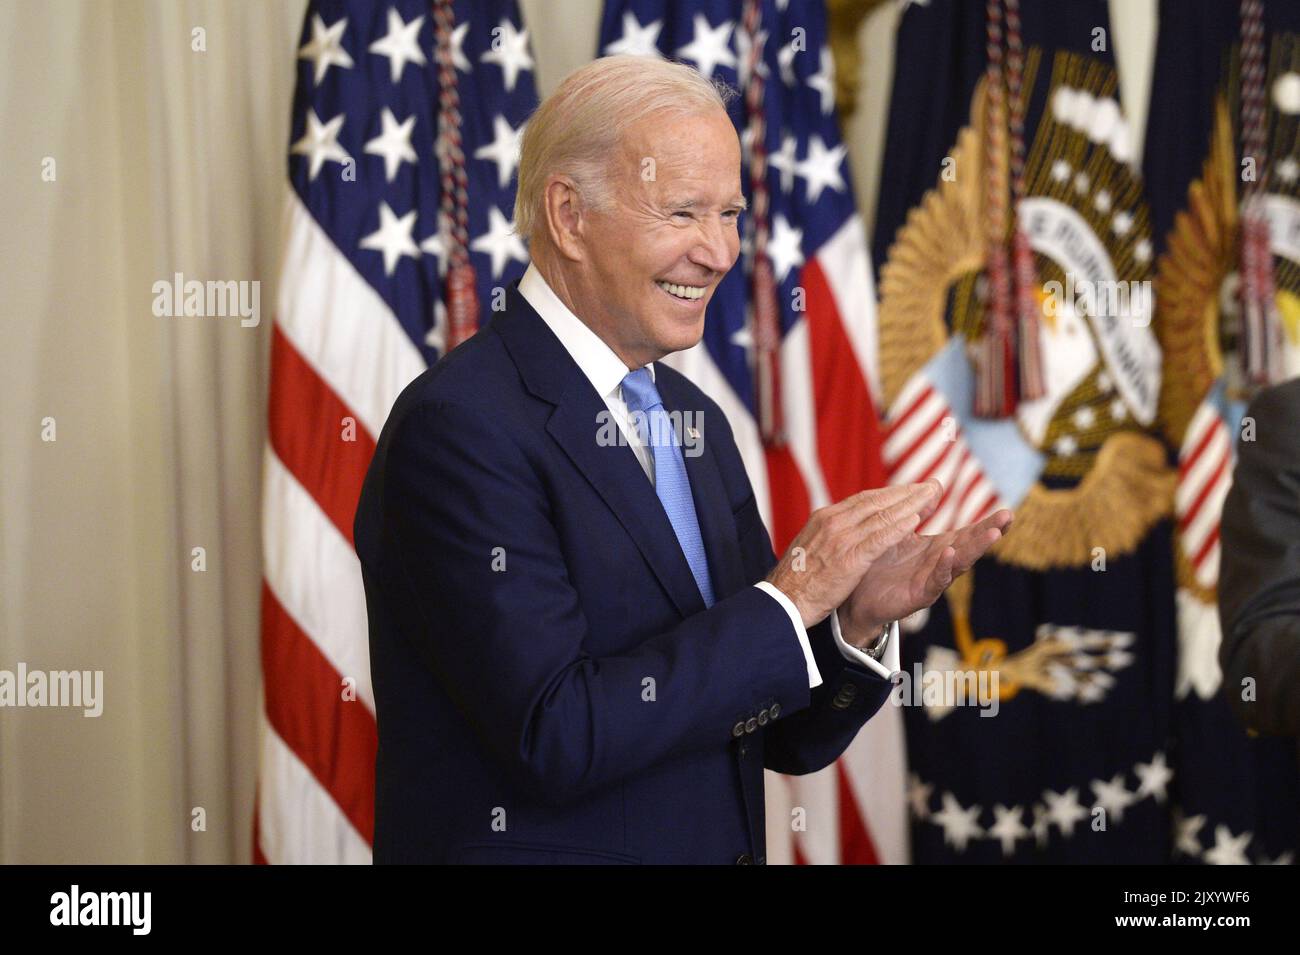 Washington, United States. 07th Sep, 2022. President Joe Biden claps during a portrait unveiling ceremony for Former President Barack Obama and former First Lady Michelle Obama in the East Room of the White House in Washington, DC on Wednesday, September 7, 2022. Photo by Bonnie Cash/UPI Credit: UPI/Alamy Live News Stock Photo